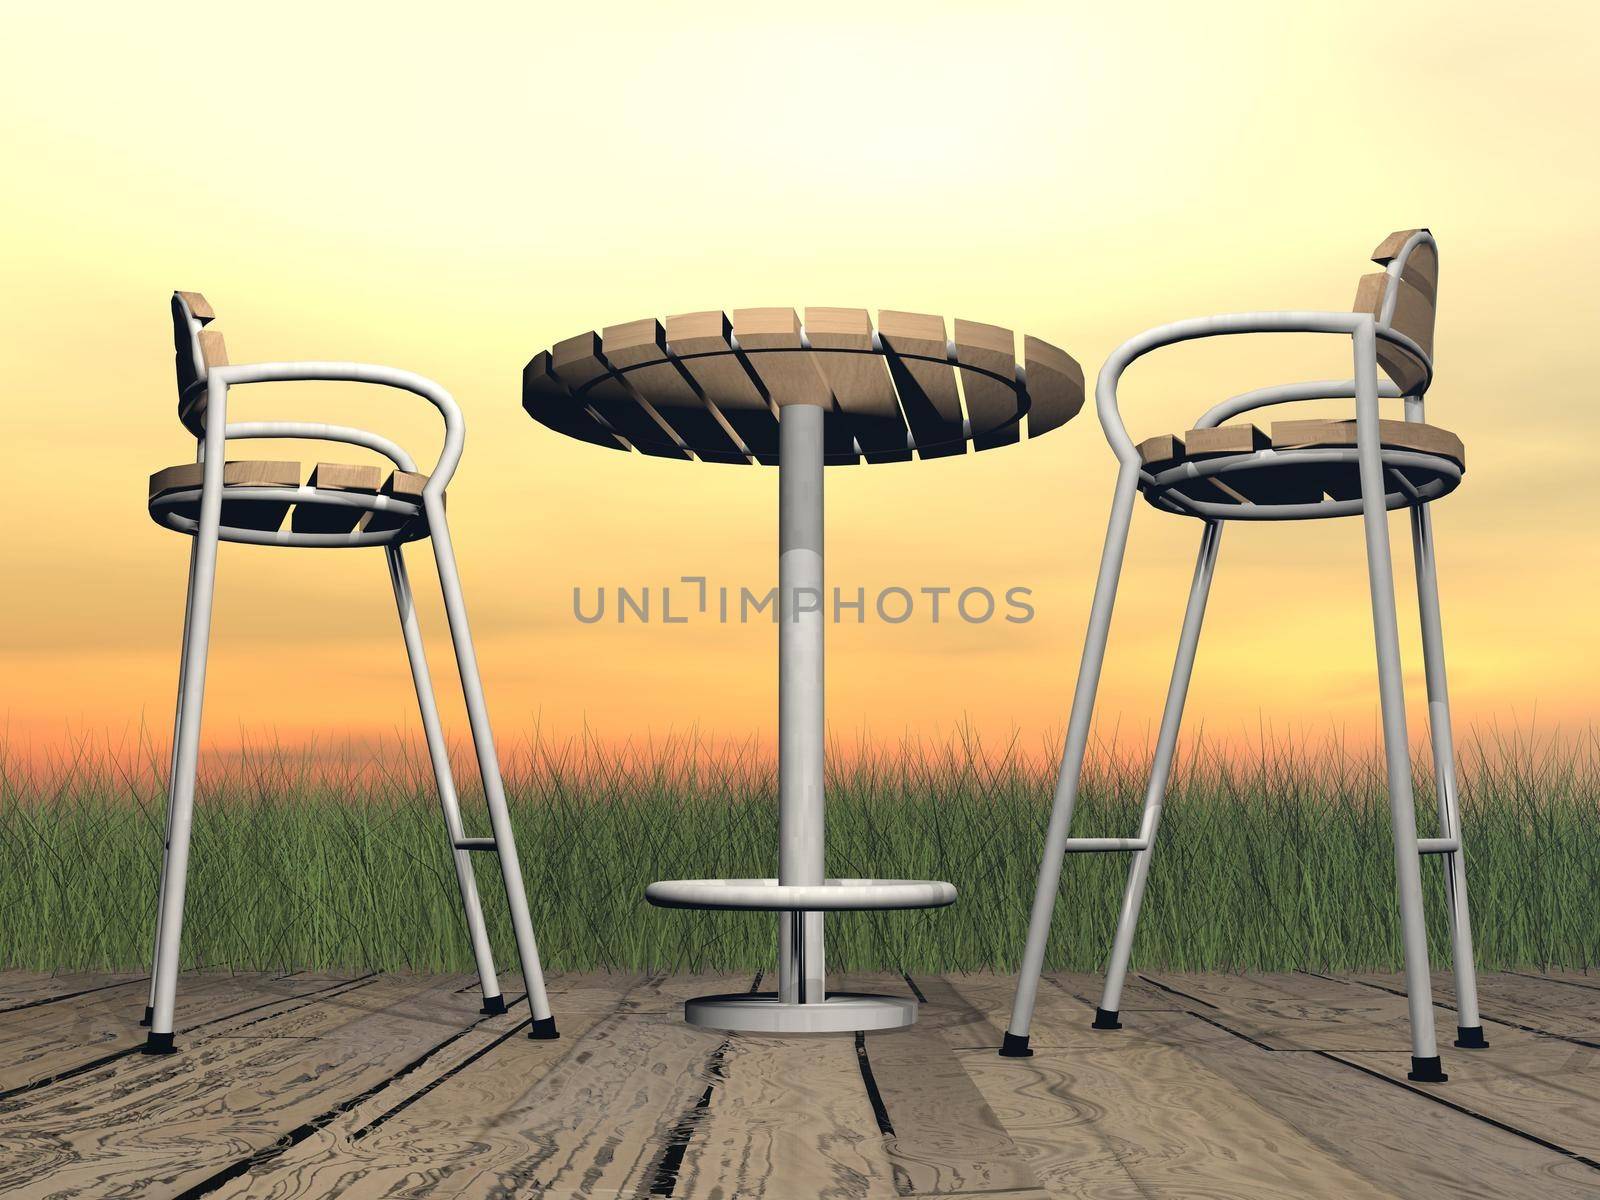 Two chairs and one table on a wooden floor in front of the garden by sunset light